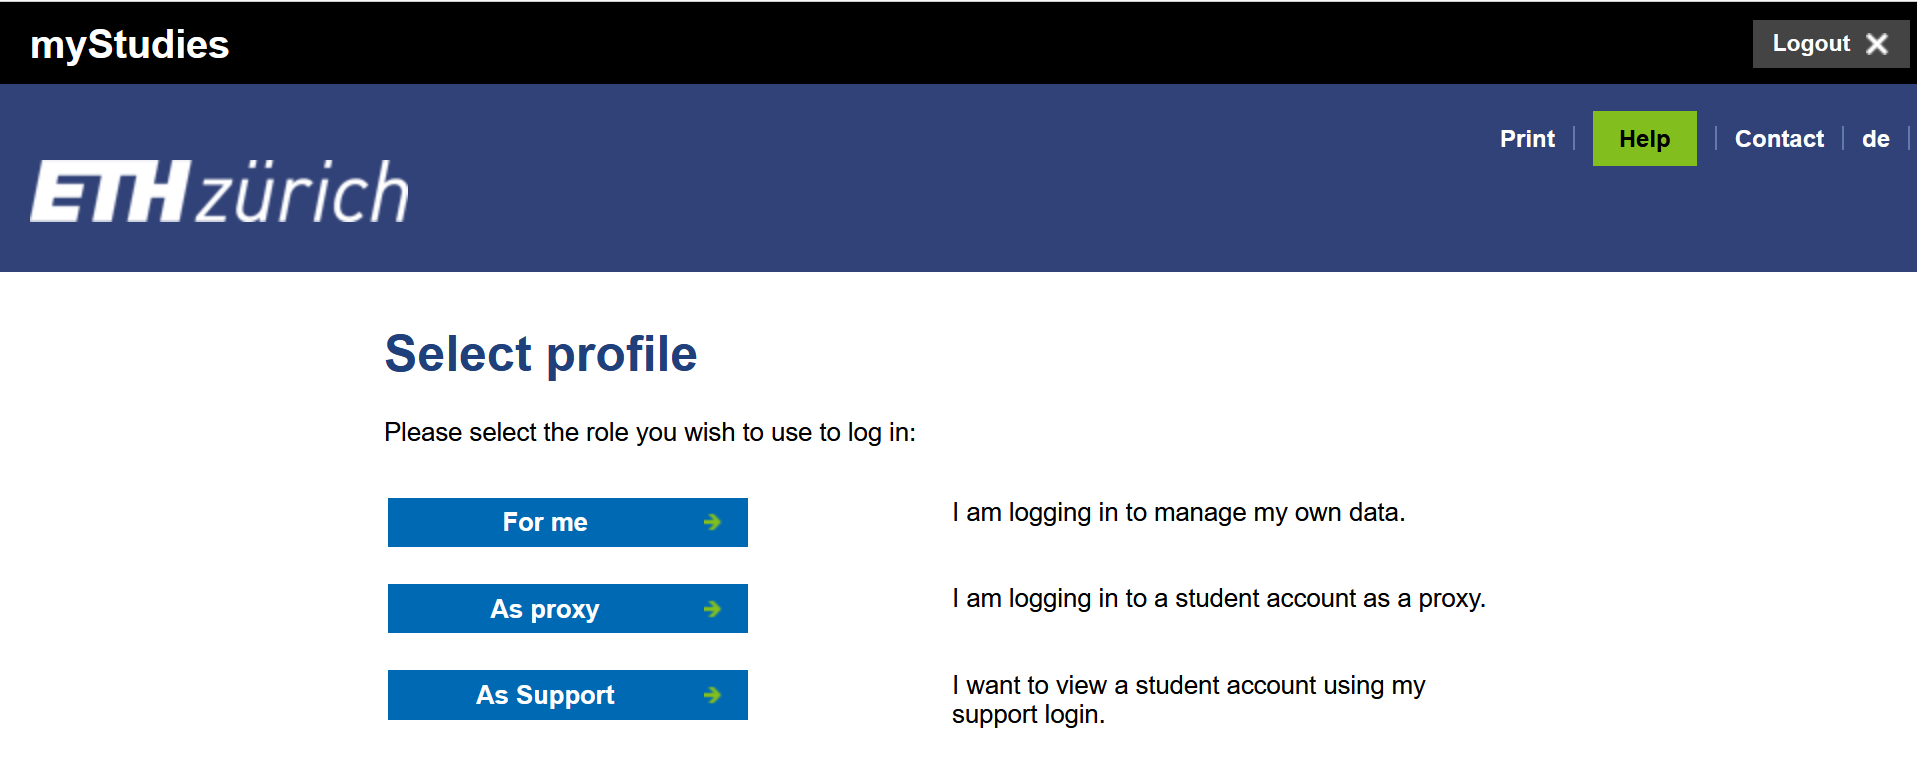 It shows a screenshot from the application myStudies. Select a profile to login for support processes is displayed.